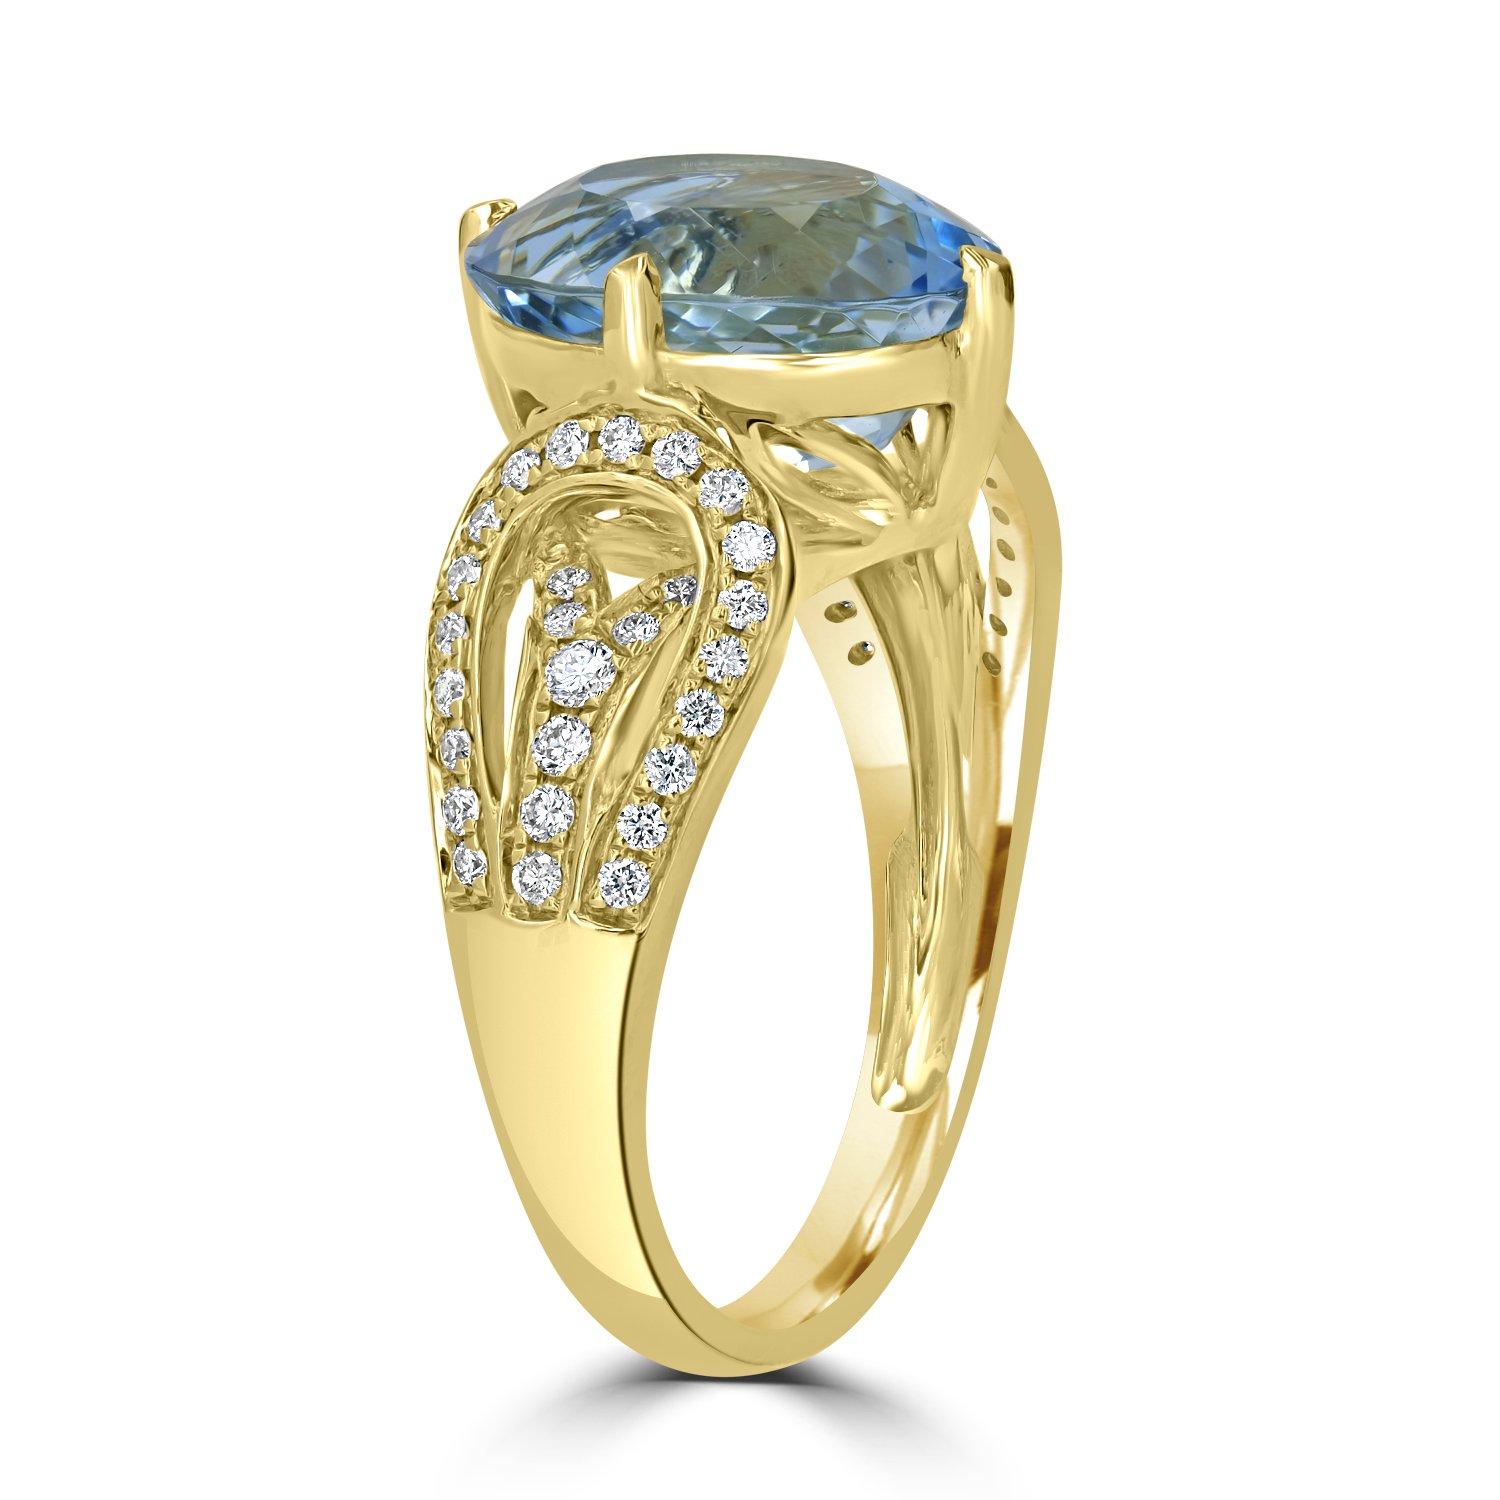 Women's 4.02ct Aquamarine Ring with 0.3Tct Diamonds Set in 14K Yellow Gold For Sale